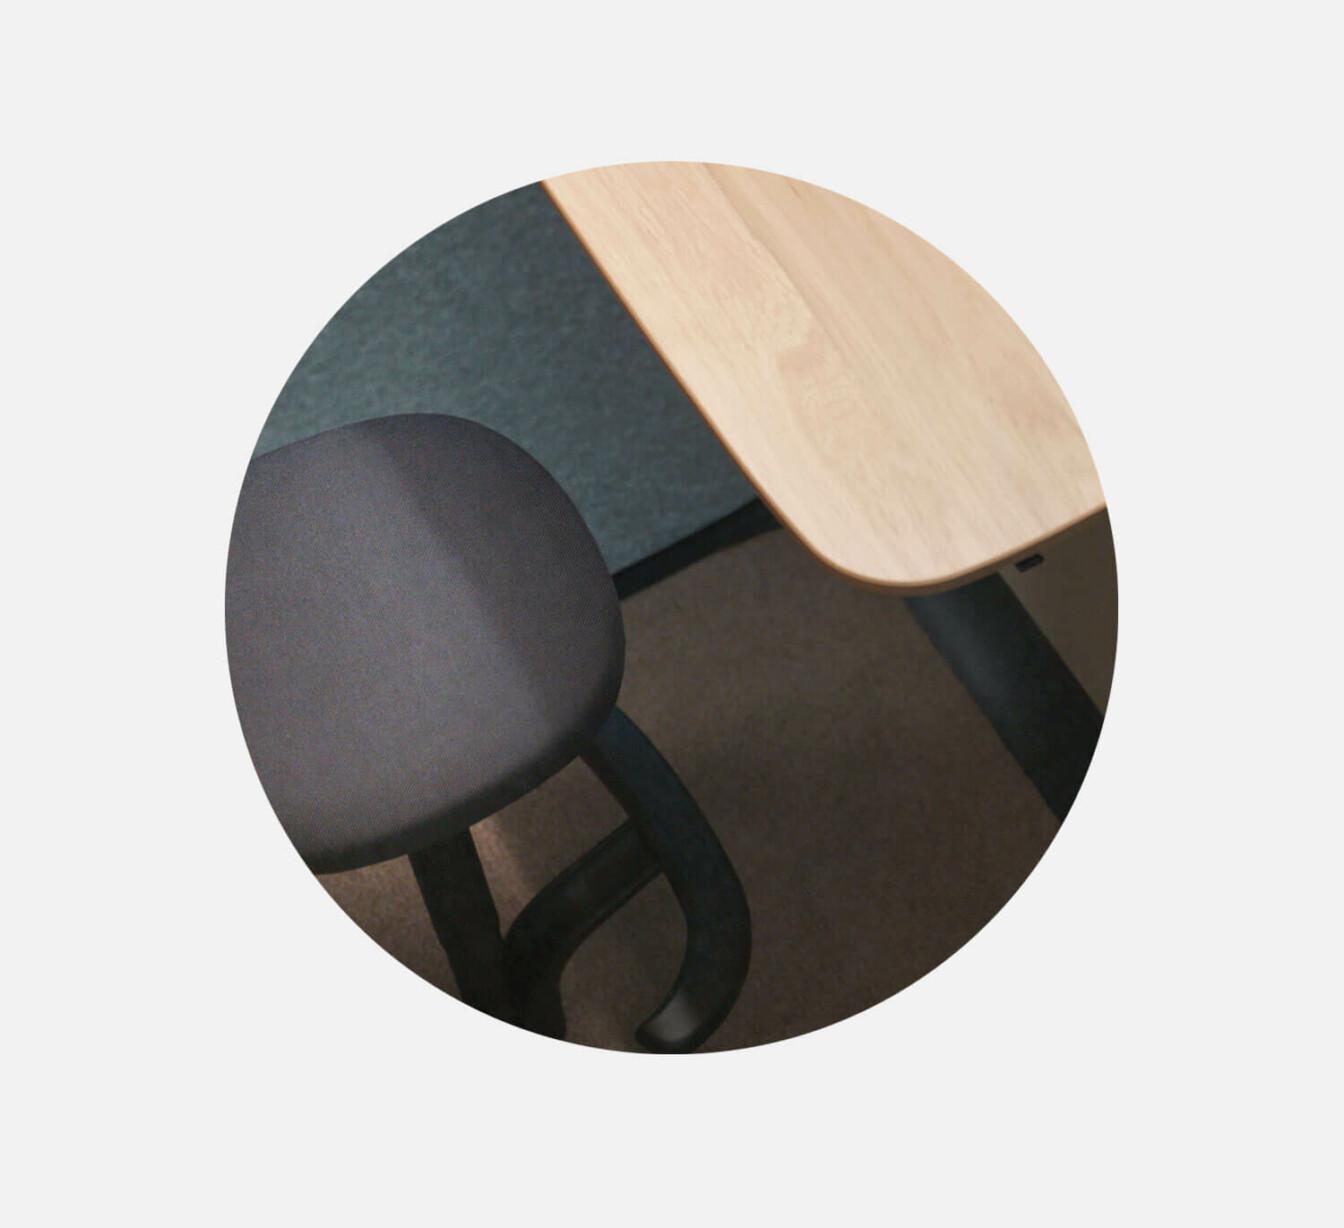 A detailed image of Framery One Compact's table and seat.